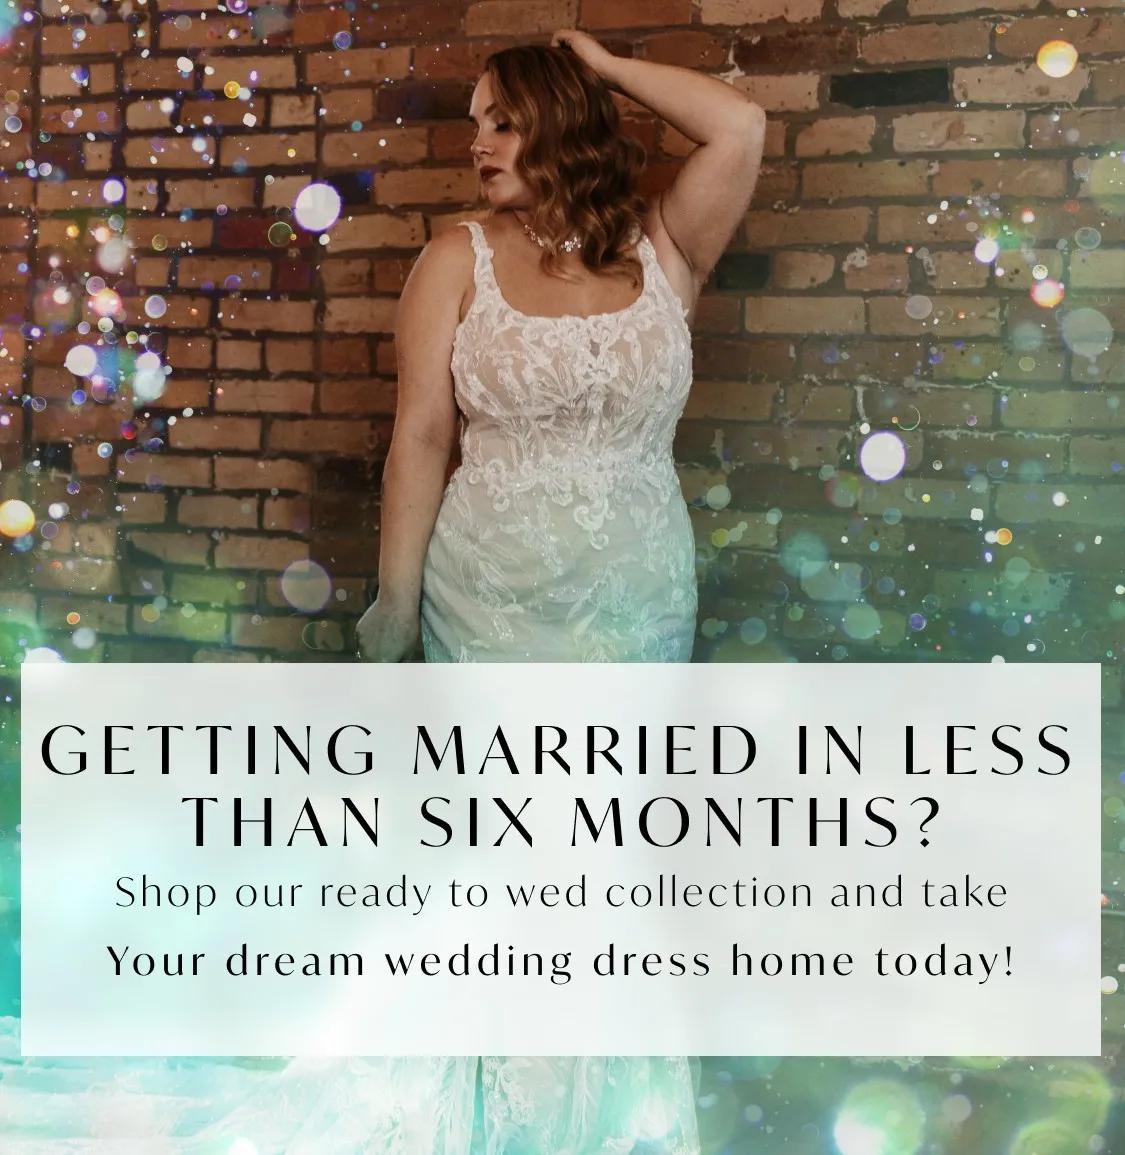 gettimg married in less than 6 months banner for mobile